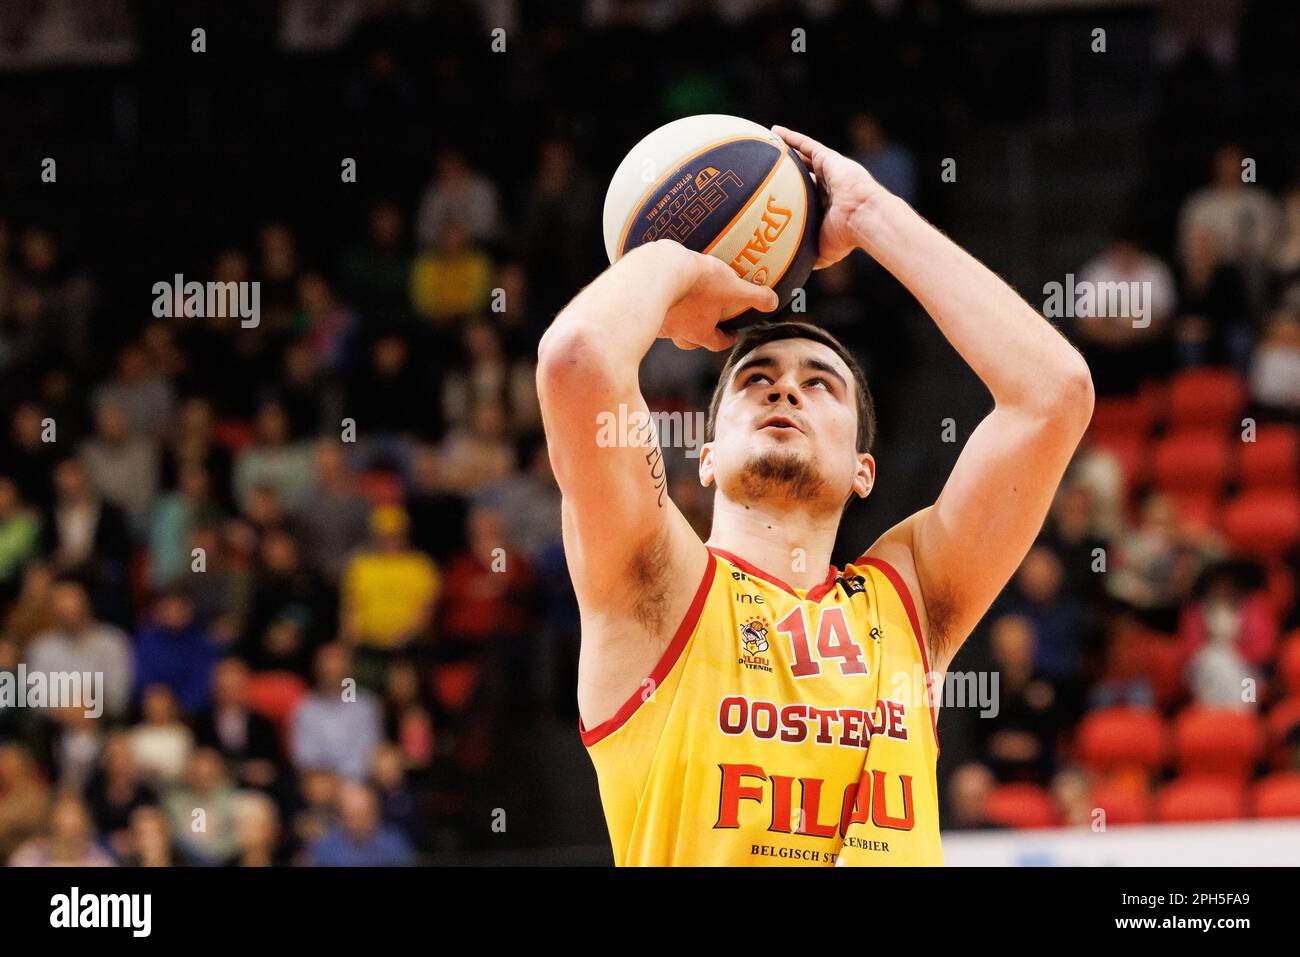 Oostende, Belgium. 26th Mar, 2023. Oostende's Servaas Buysschaert pictured  in action during a basketball match between Filou Oostende and dutch club  Heroes Den Bosch, Sunday 26 March 2023 in Oostende, on day